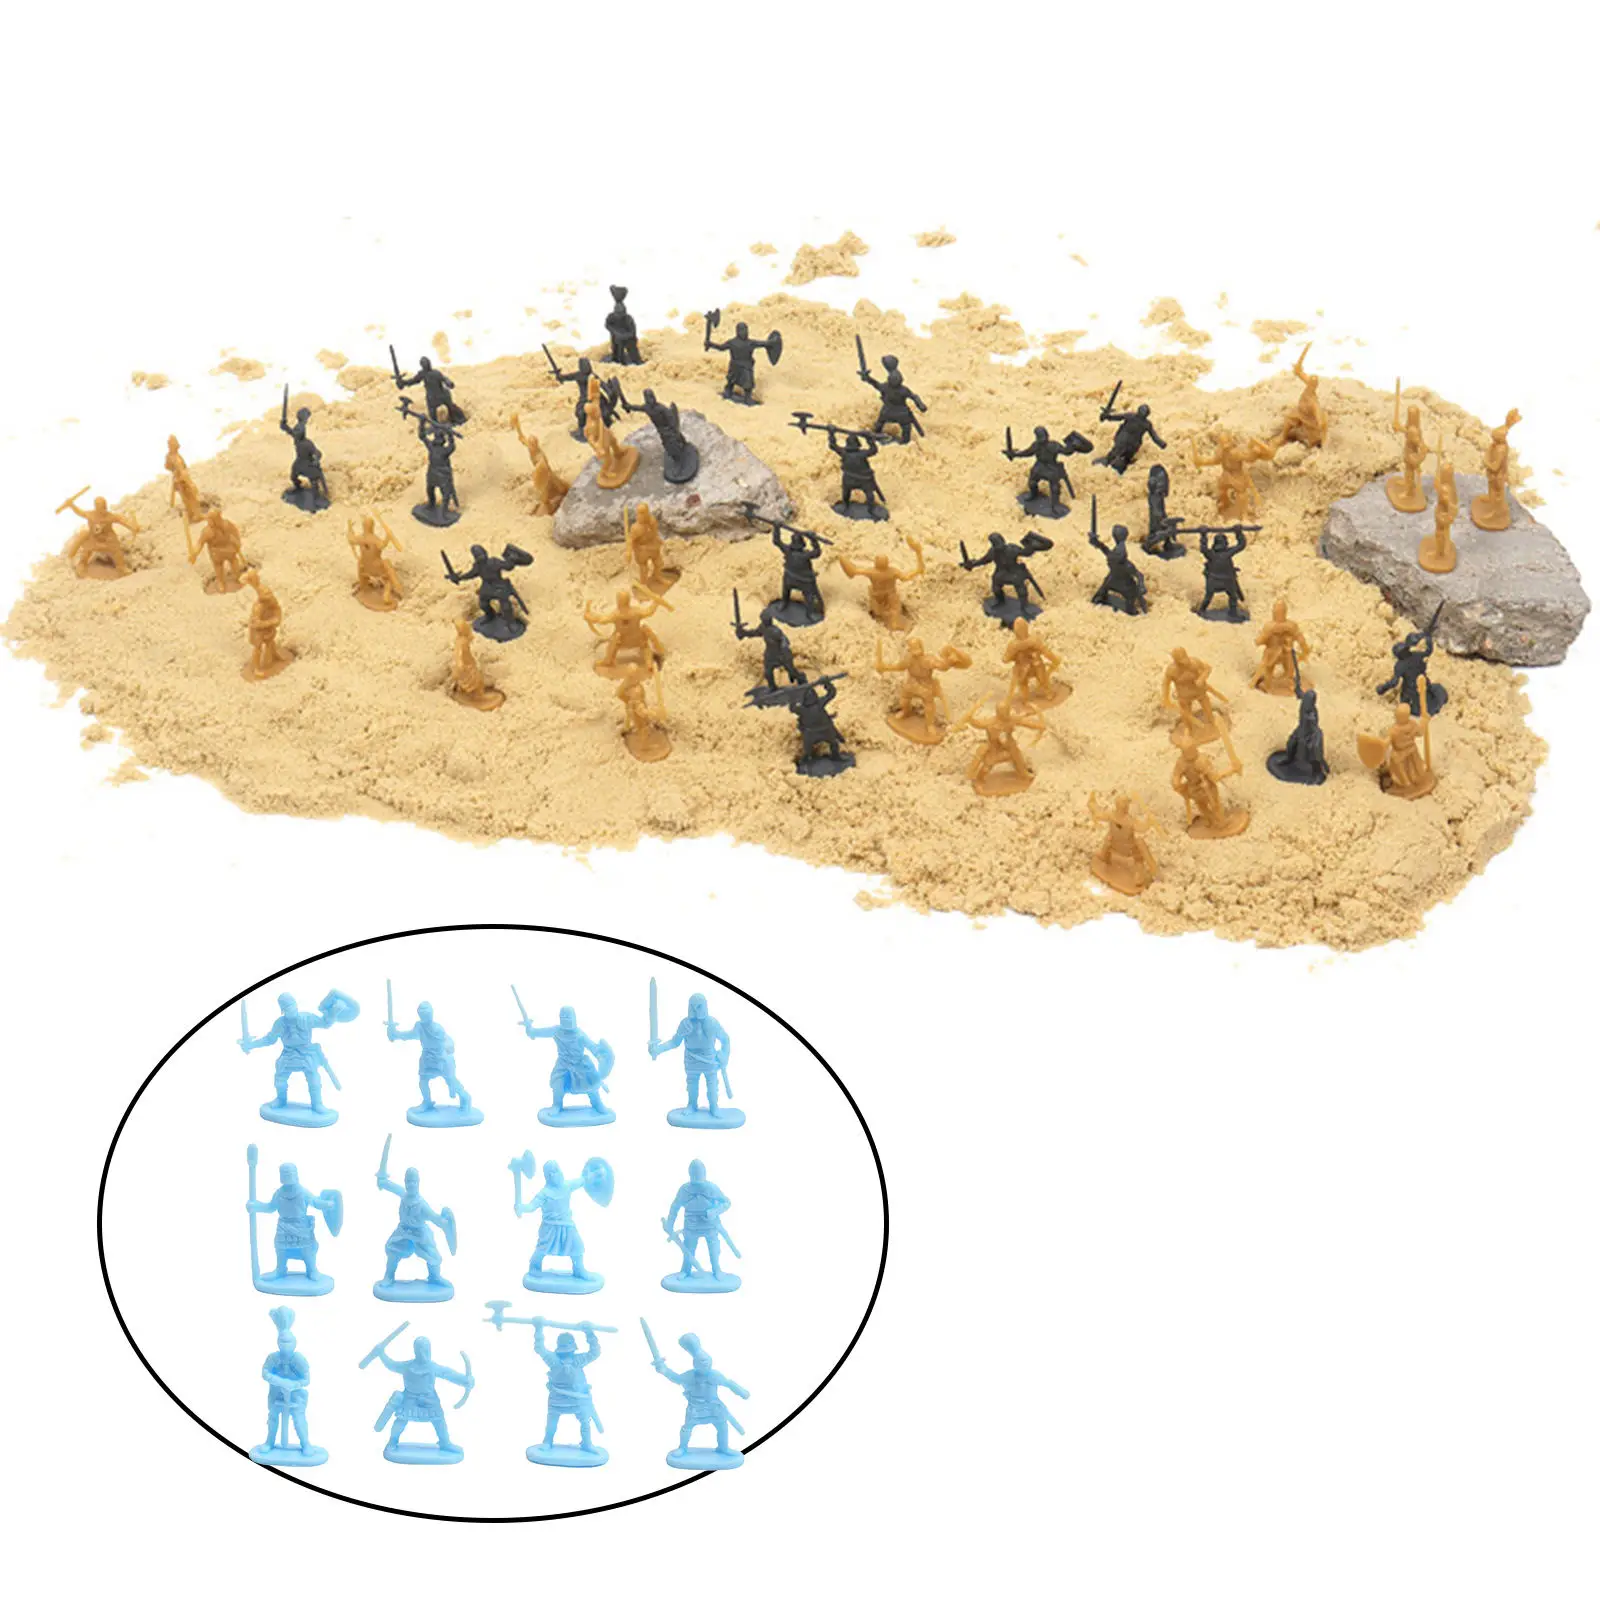 200pcs/Set Plastic Medieval Soldiers Model Archaic Soldiers Army Battle Scene 1:72 Scale Historical Warfare for Kids Layout